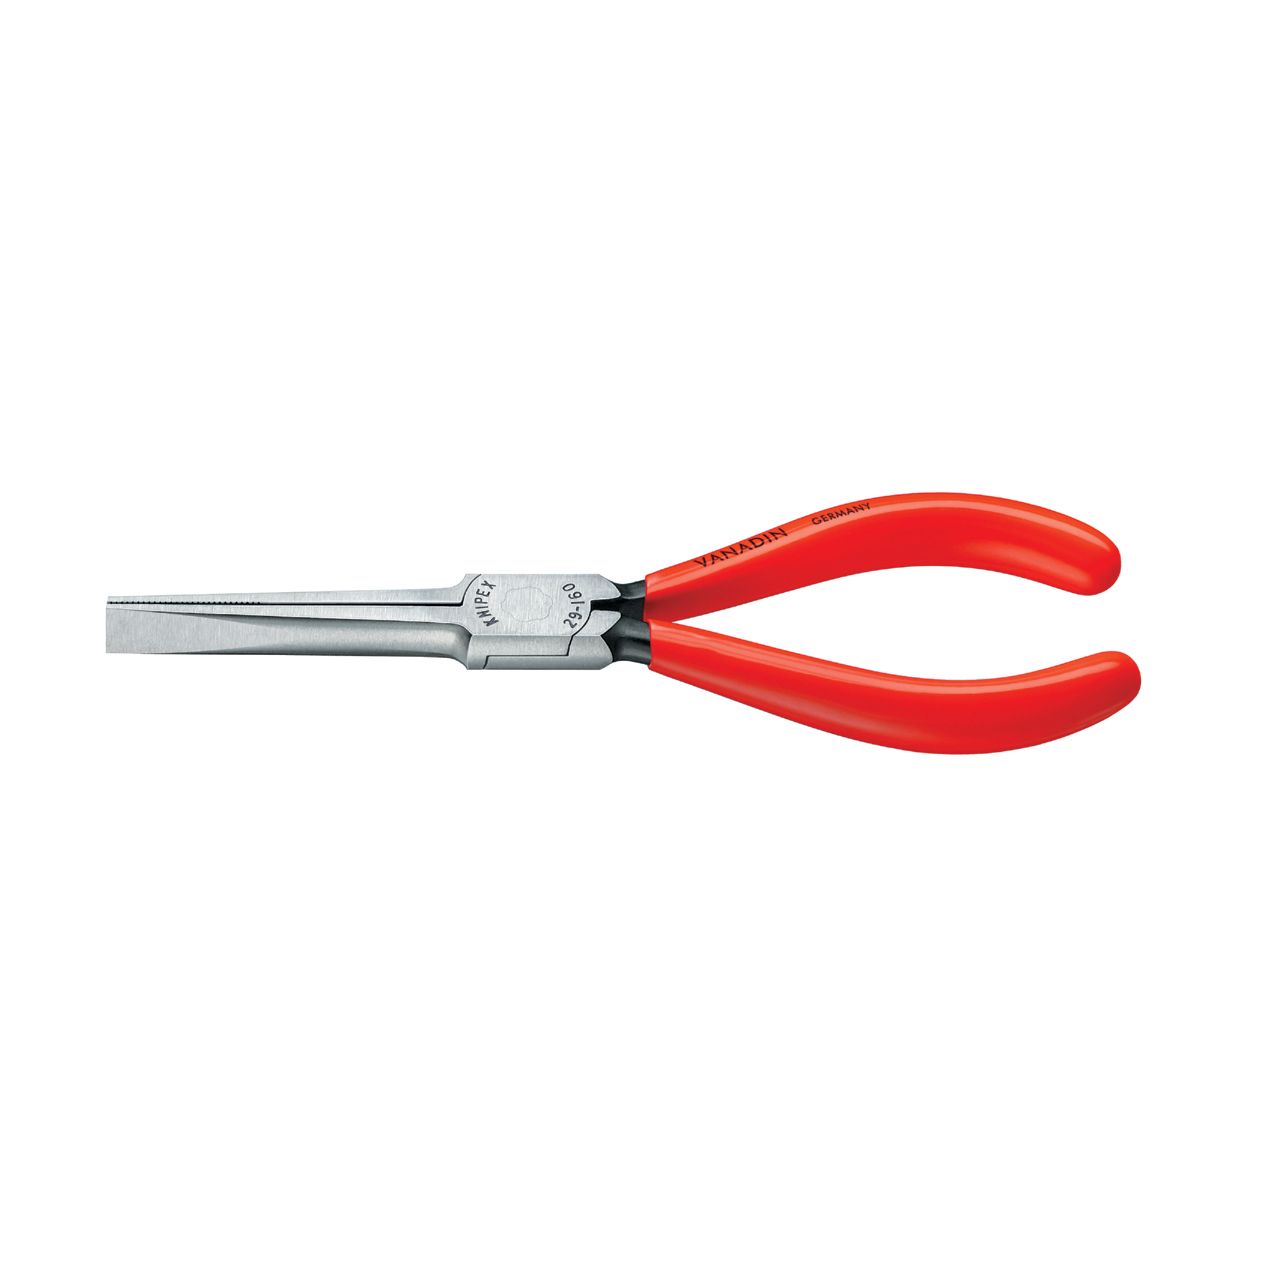 Knipex 6 1/4" Flat nose assembly pliers